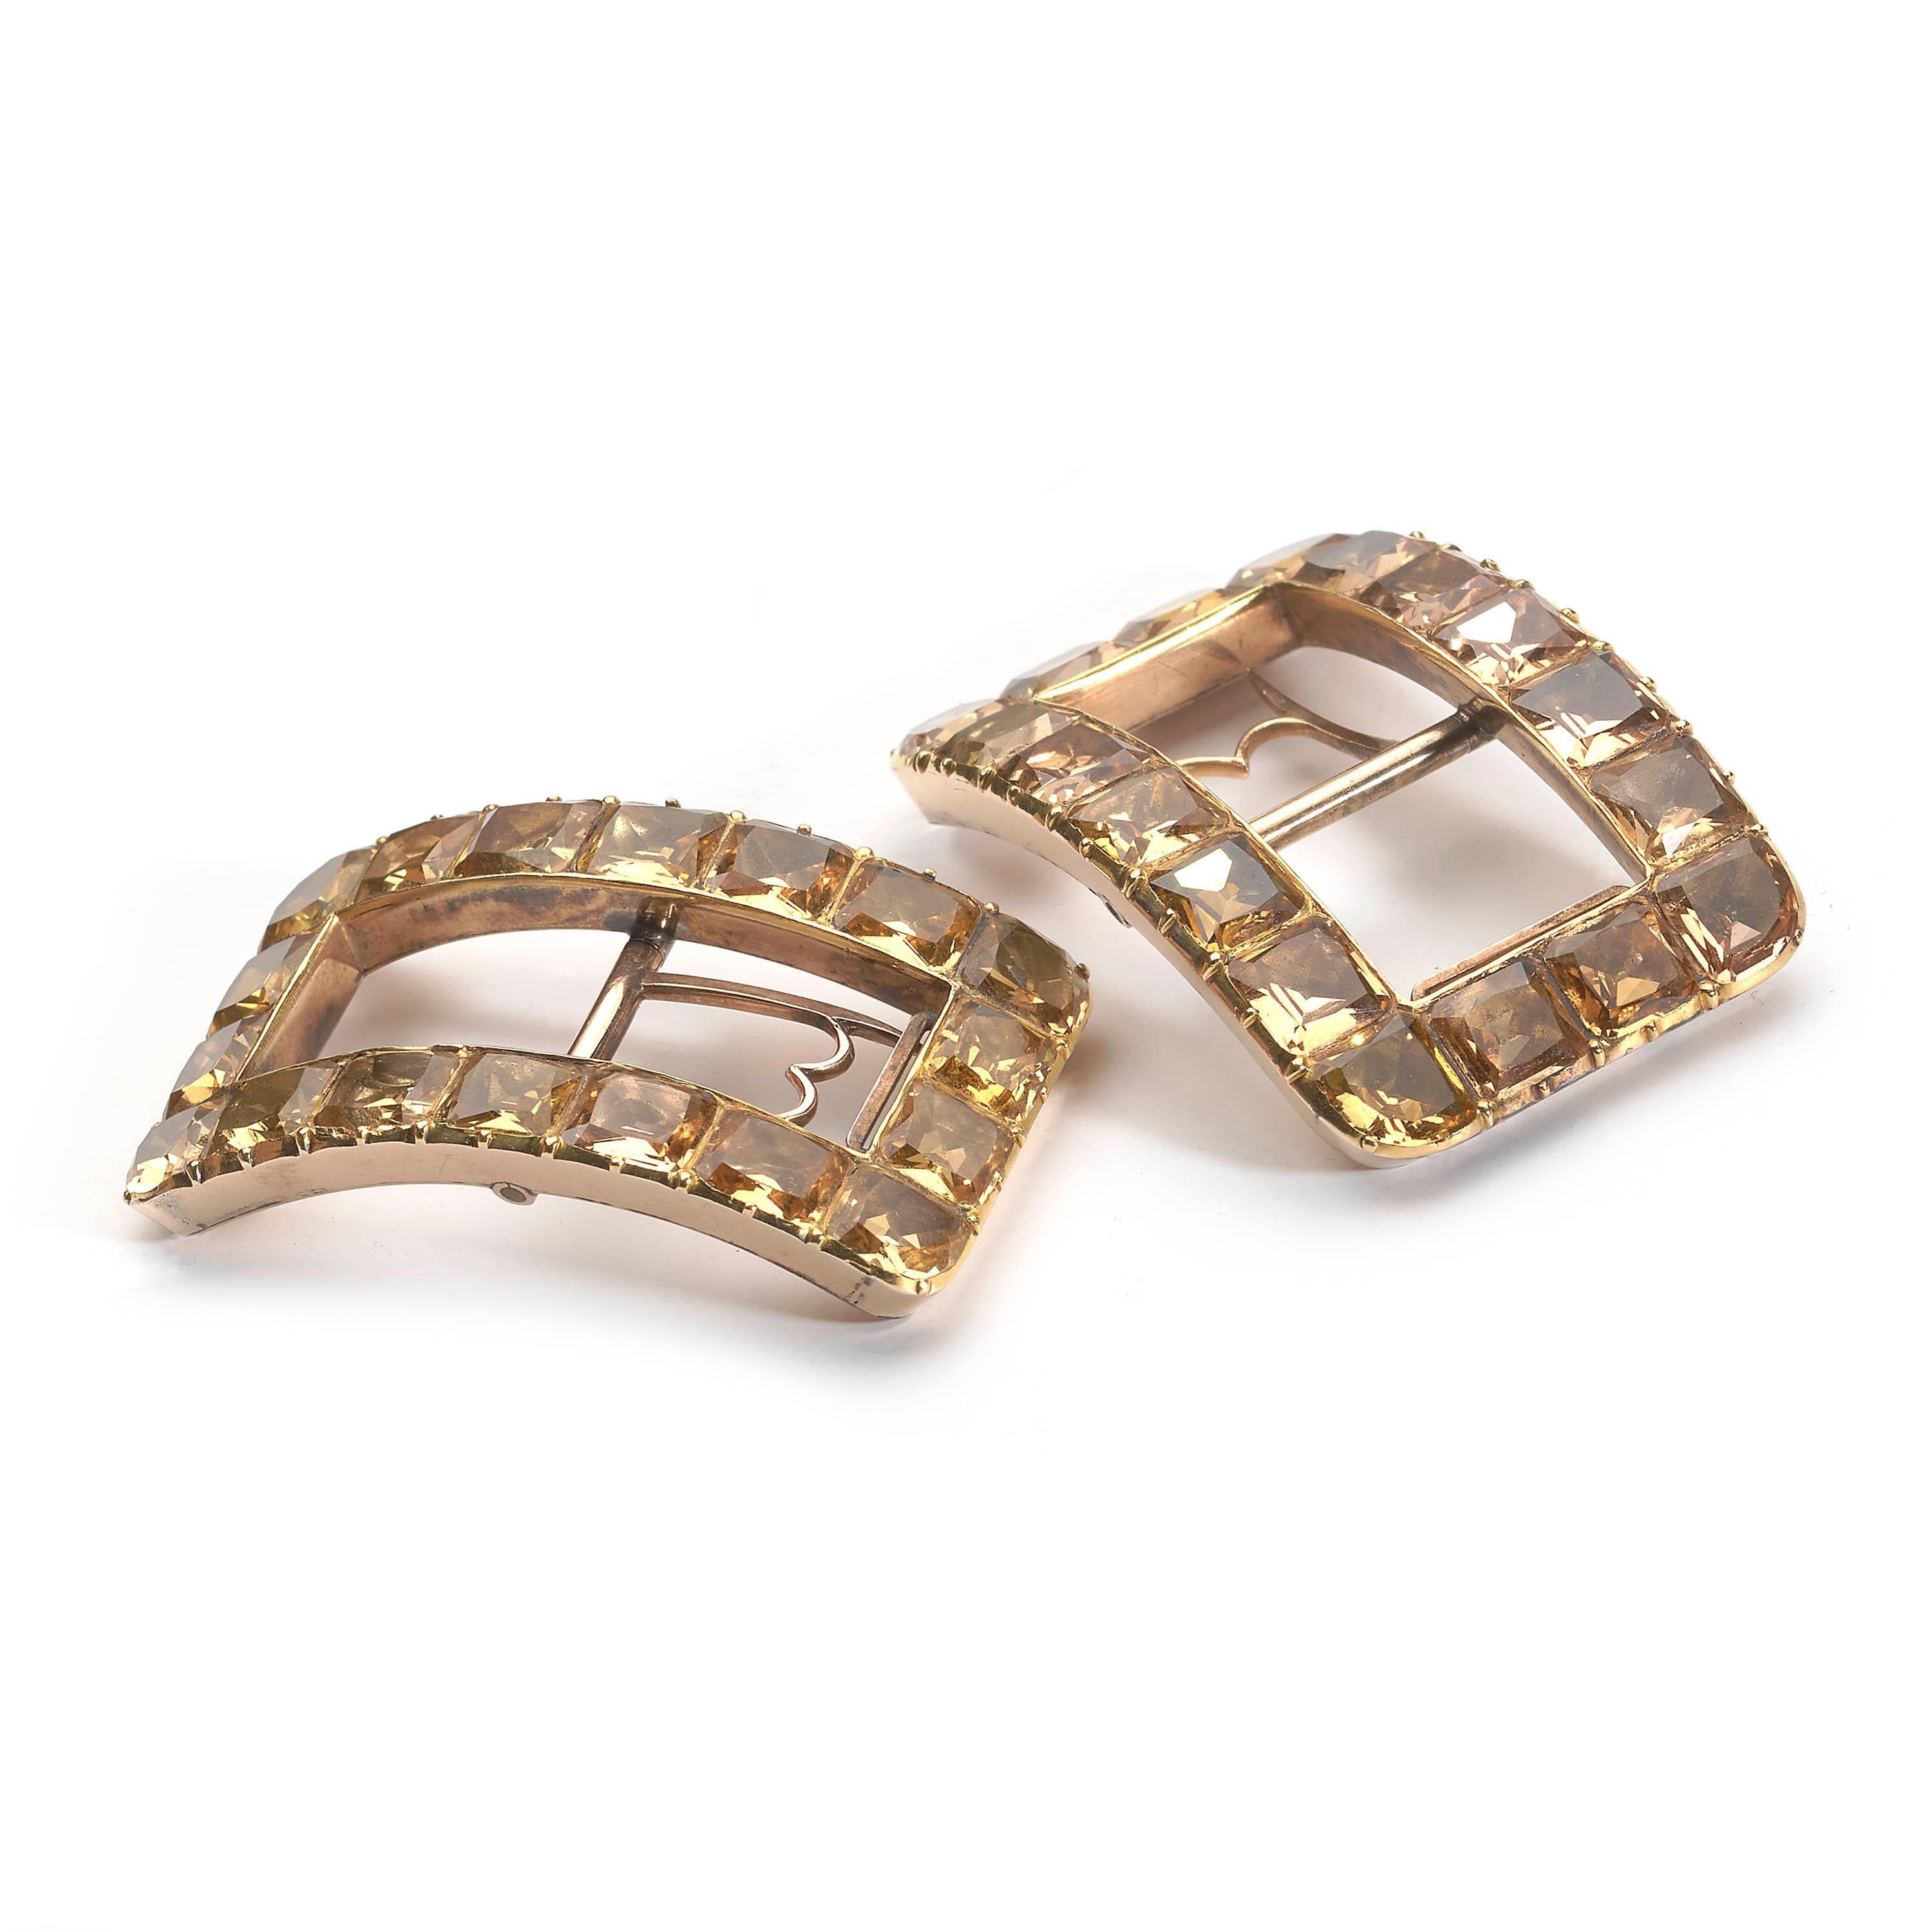 A pair of George III topaz and gold shoe buckles, set with cushion cut foil backed topaz, with cut down settings forming the outer, curved, rectangular frame, with a flat inner edge and closed back. The fittings have two row tongues with double hoop